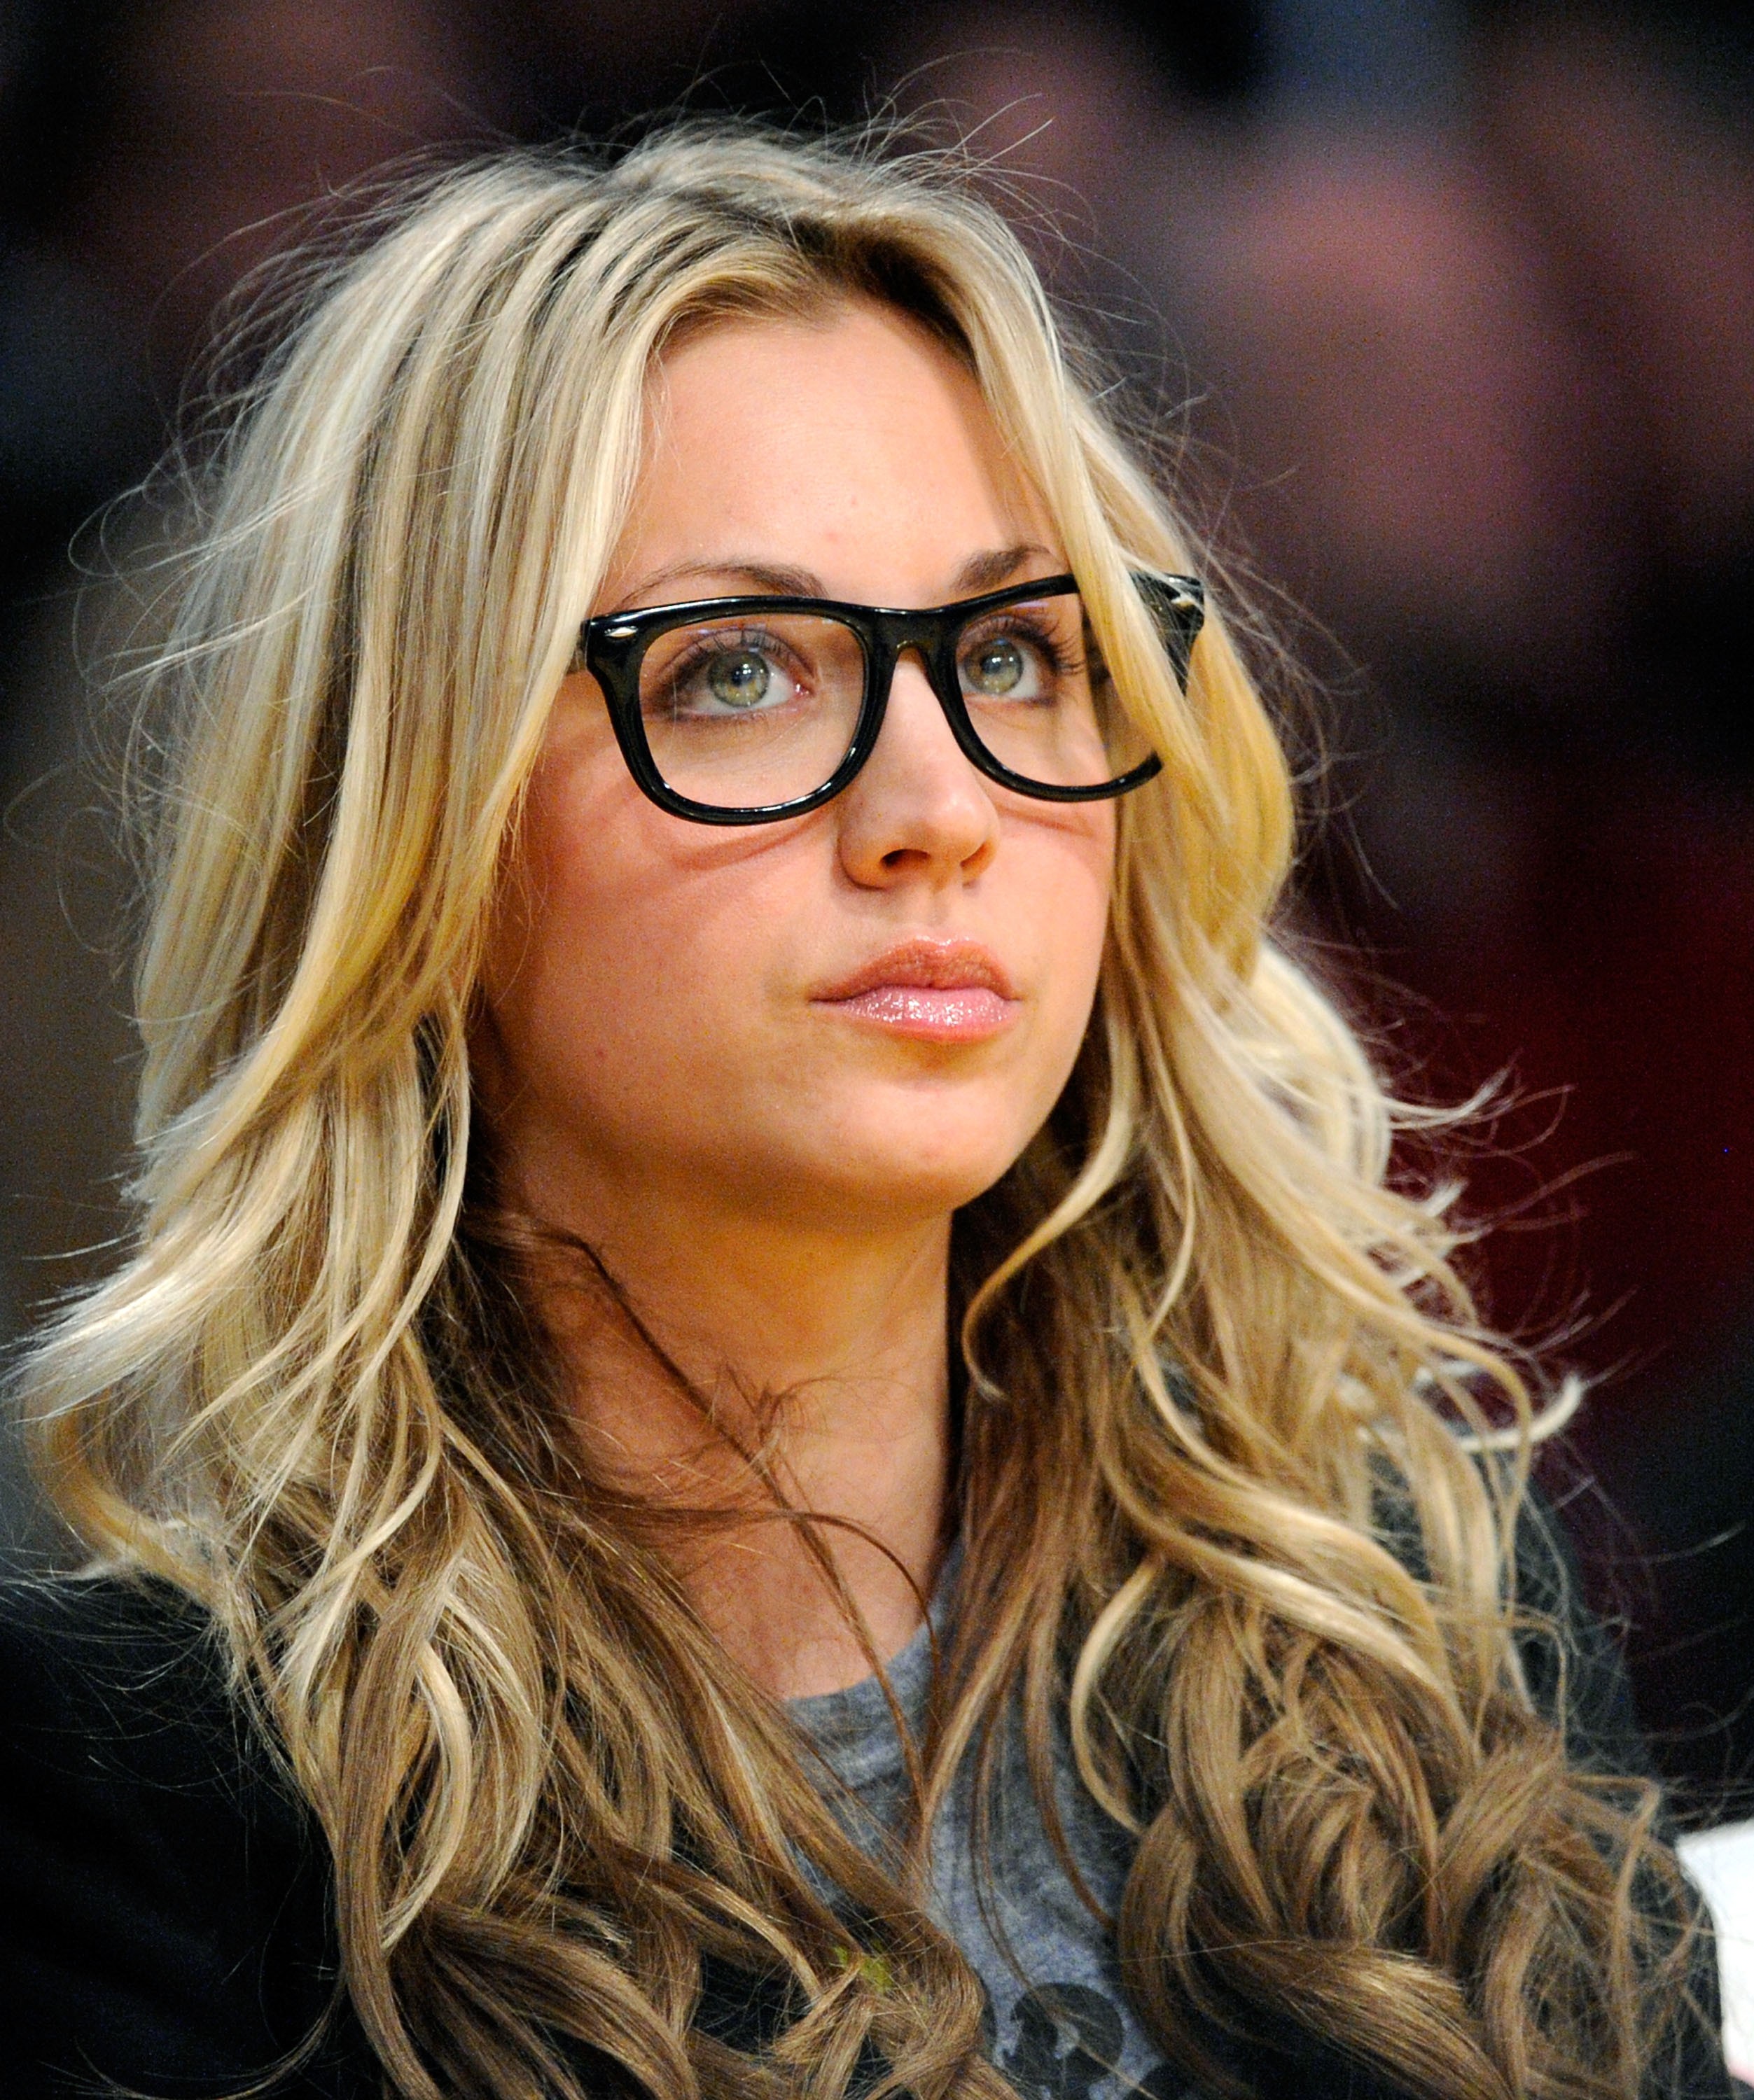 People 2505x3000 Kaley Cuoco women actress blonde long hair curly hair women with glasses focused face closeup portrait display